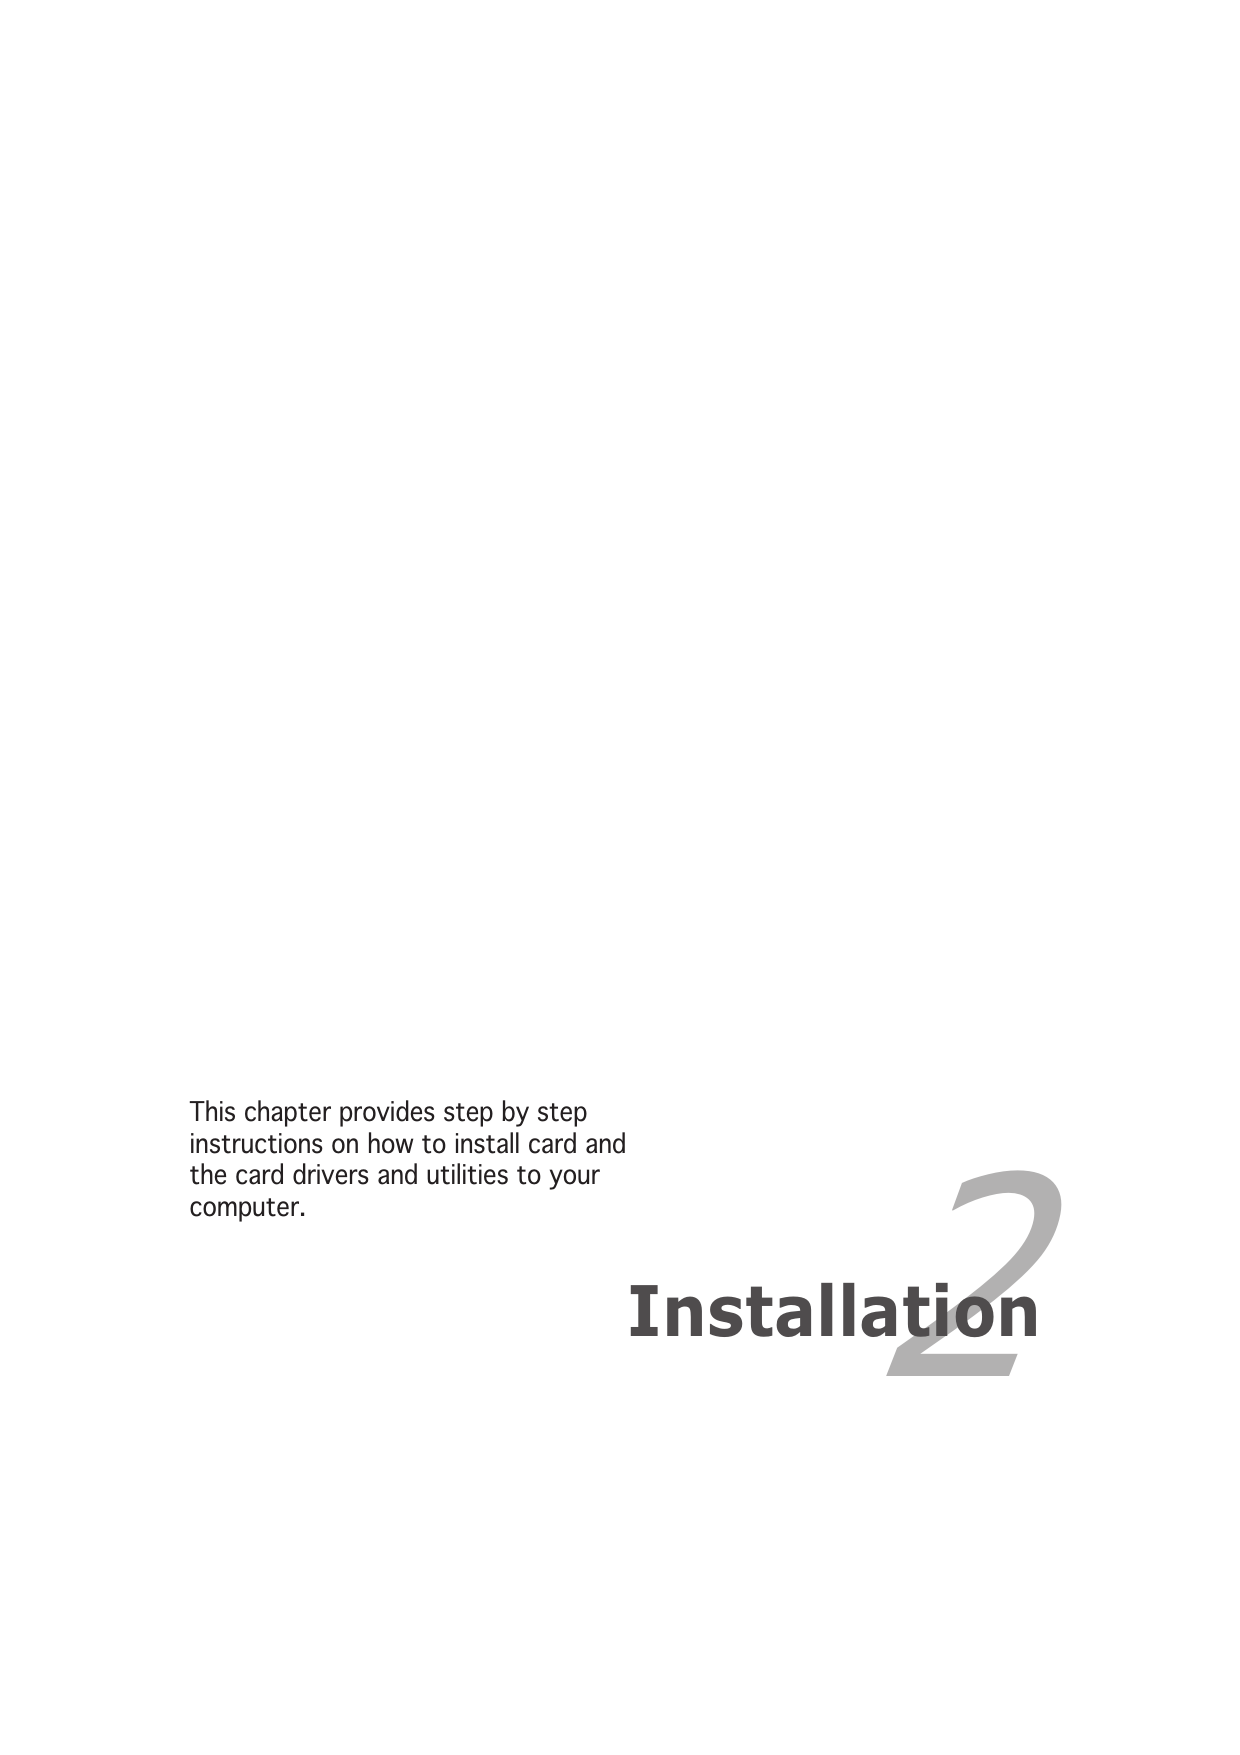 2InstallationThis chapter provides step by stepinstructions on how to install card andthe card drivers and utilities to yourcomputer.